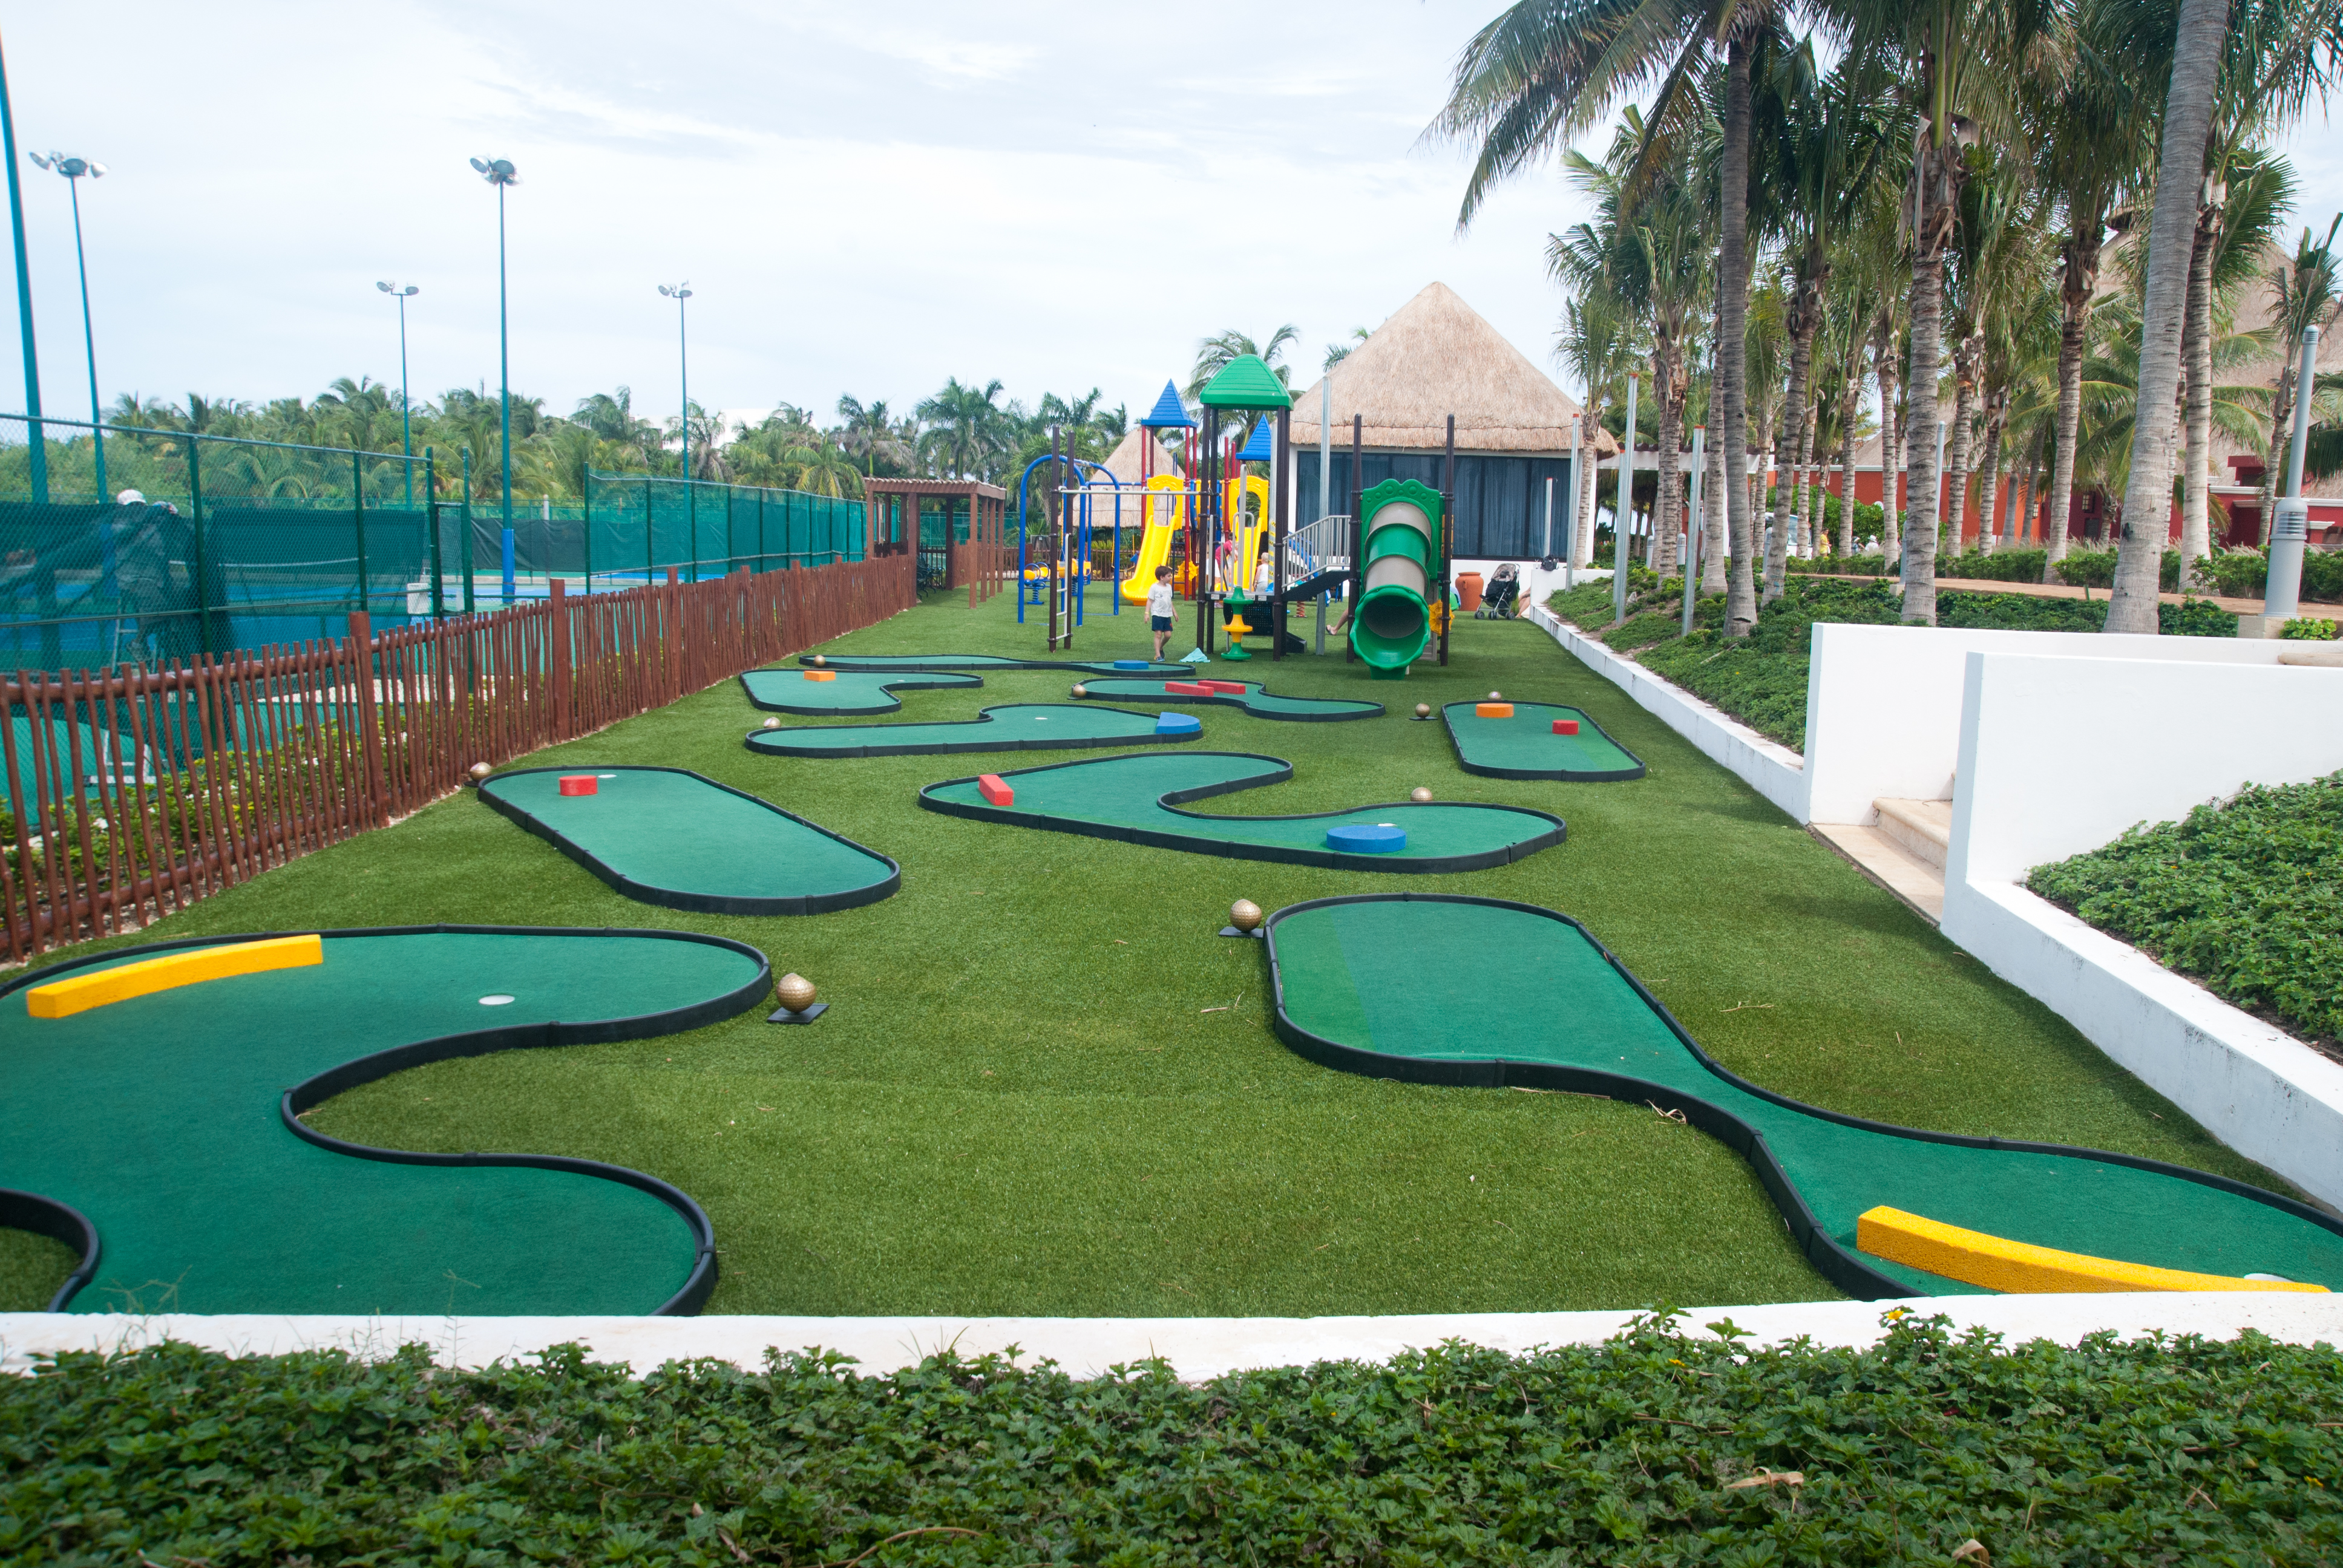 Club Med Cancun | Best Family-Friendly All-Inclusive Resort in Cancun Mexico | Golf Course